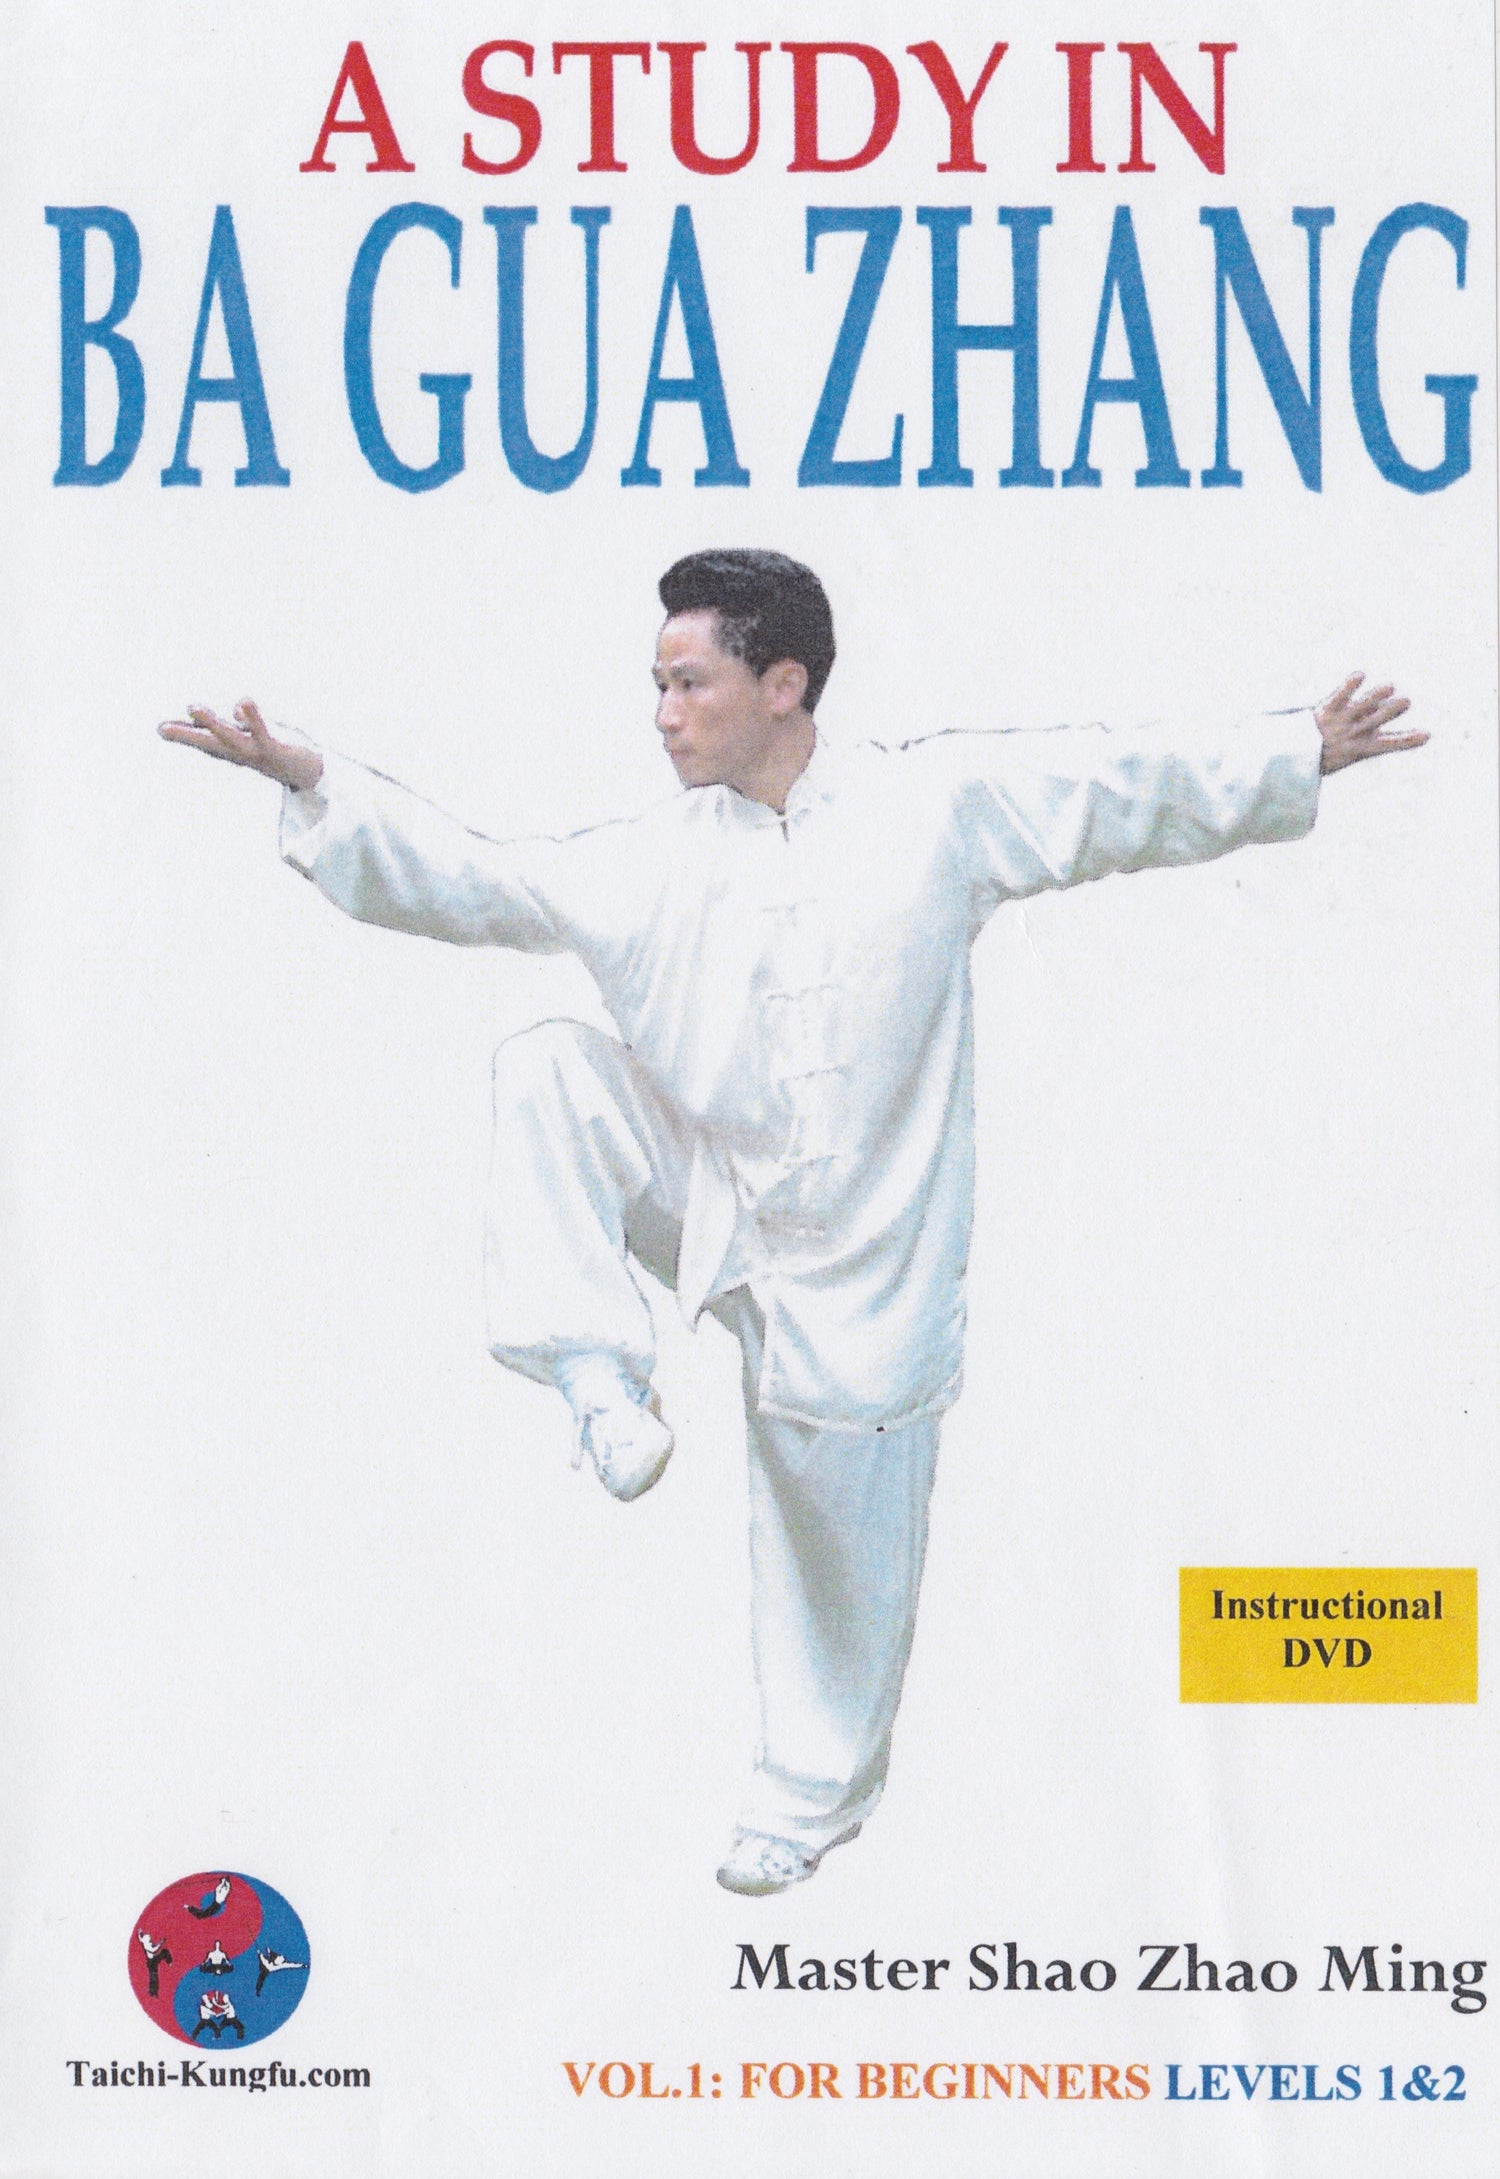 A Study in Baguazhang DVD by Shao Zhao Ming (Preowned)